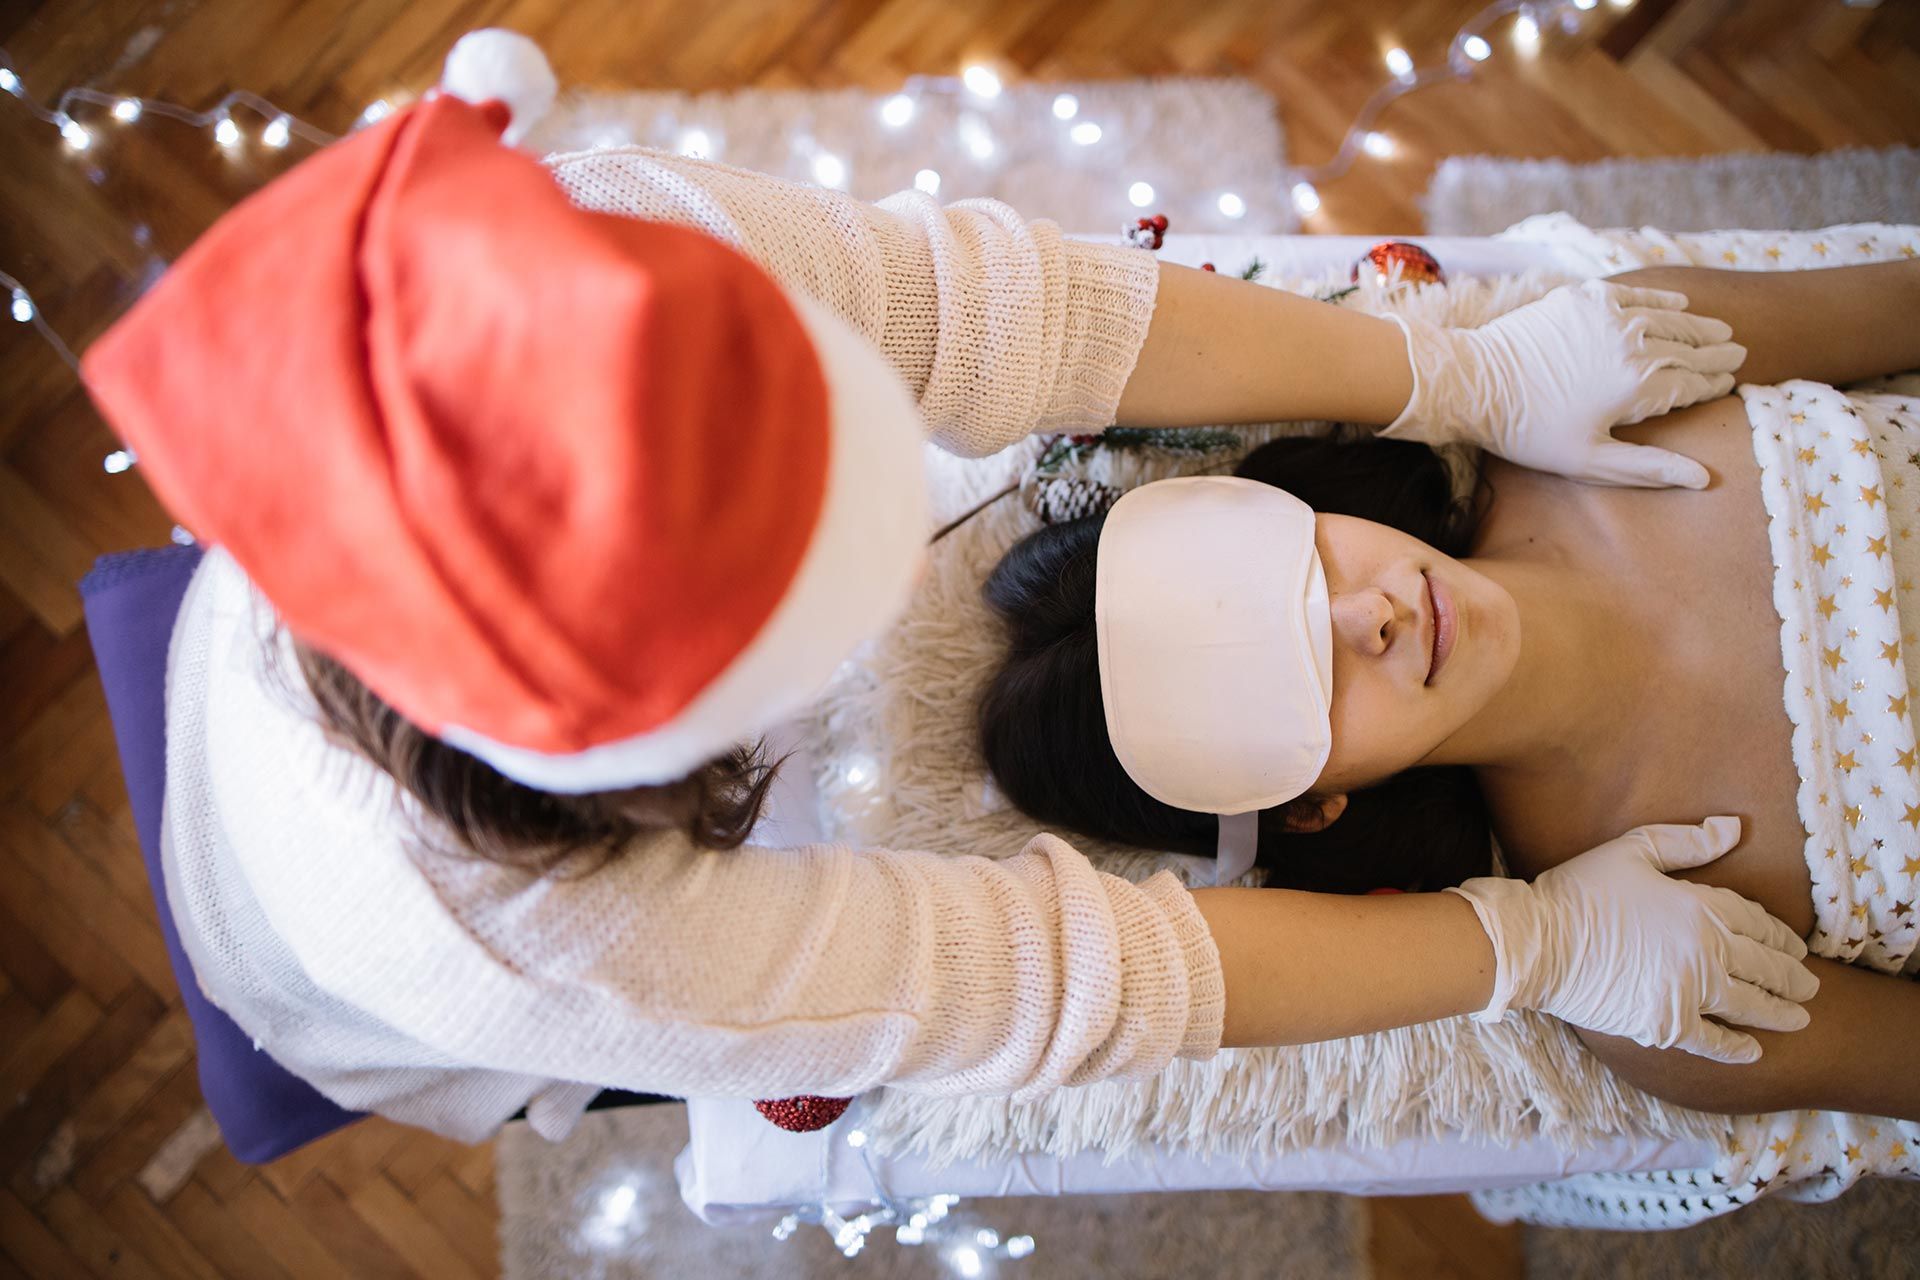 Aristocracy Salon & Day Spa offers Christmas packages for spa, massage, and salon services.